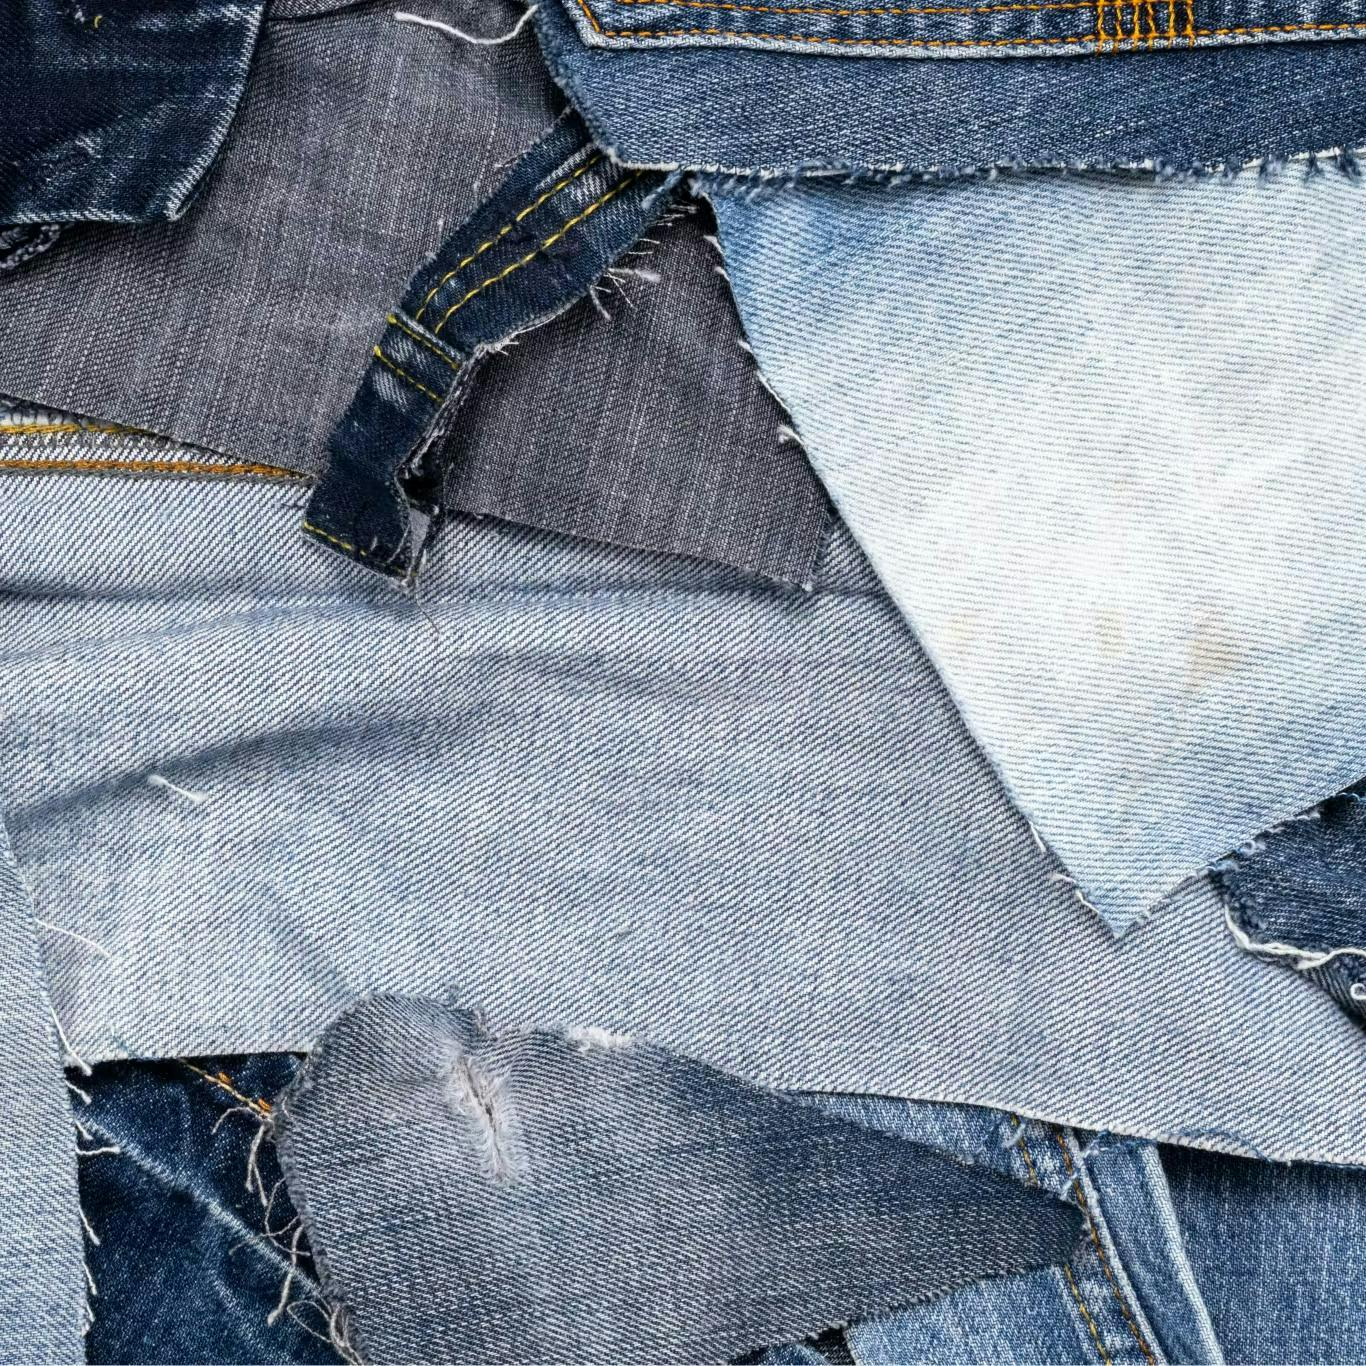 Pieces of jean fabric to help demonstrate environmental sustainability